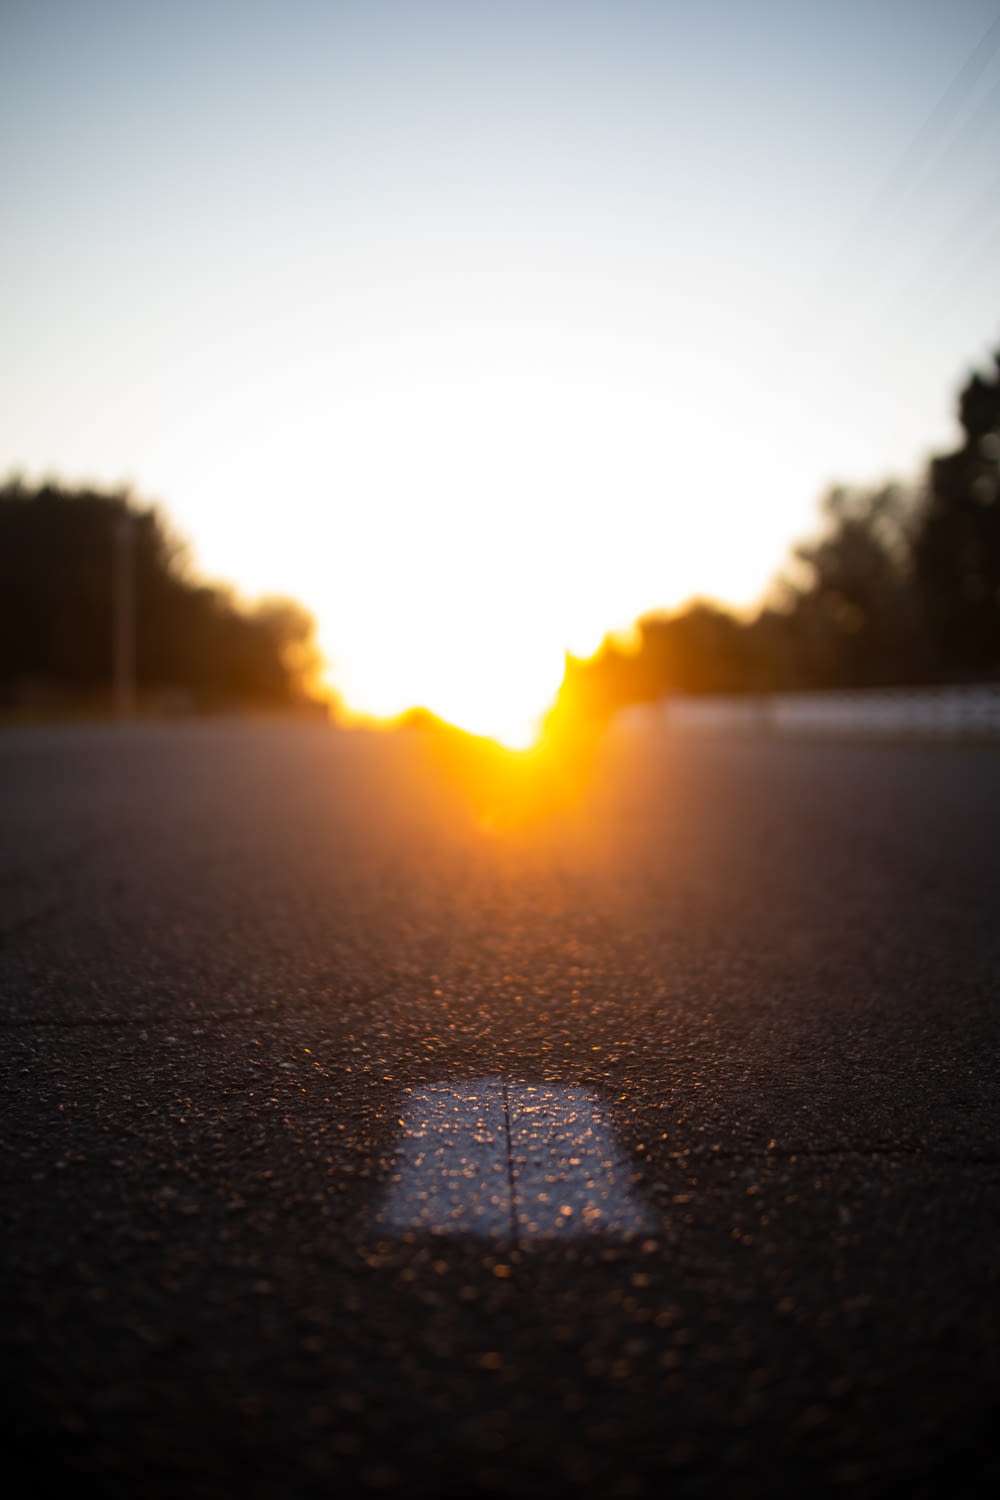 the sun is setting over a street with a shadow on the ground